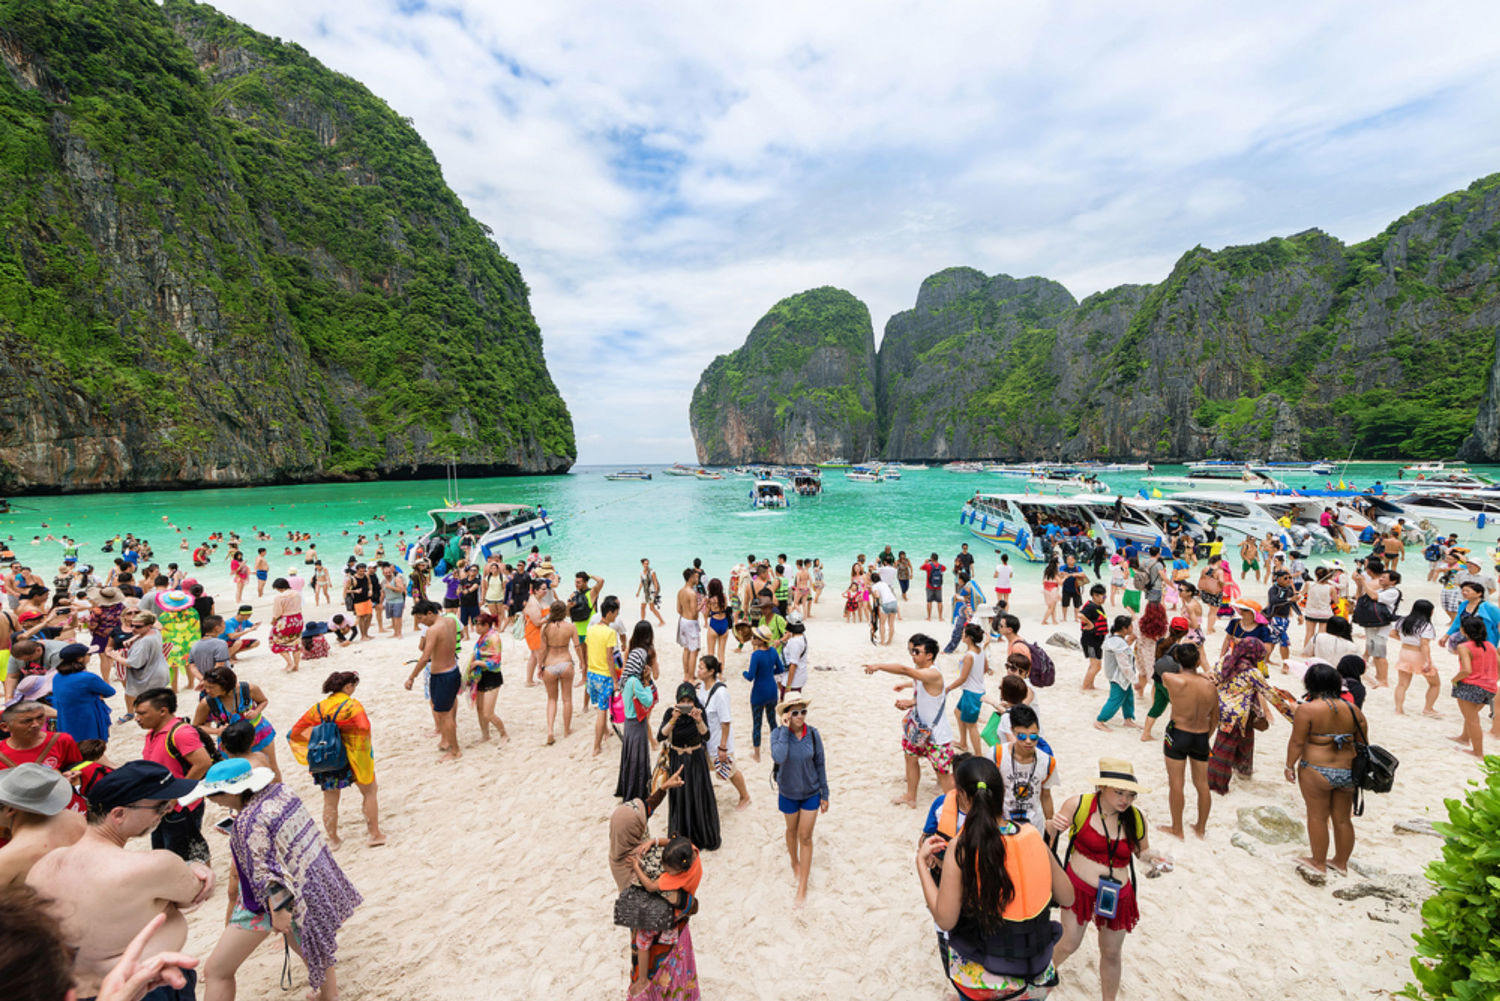 These are tourists crowding on a beach.